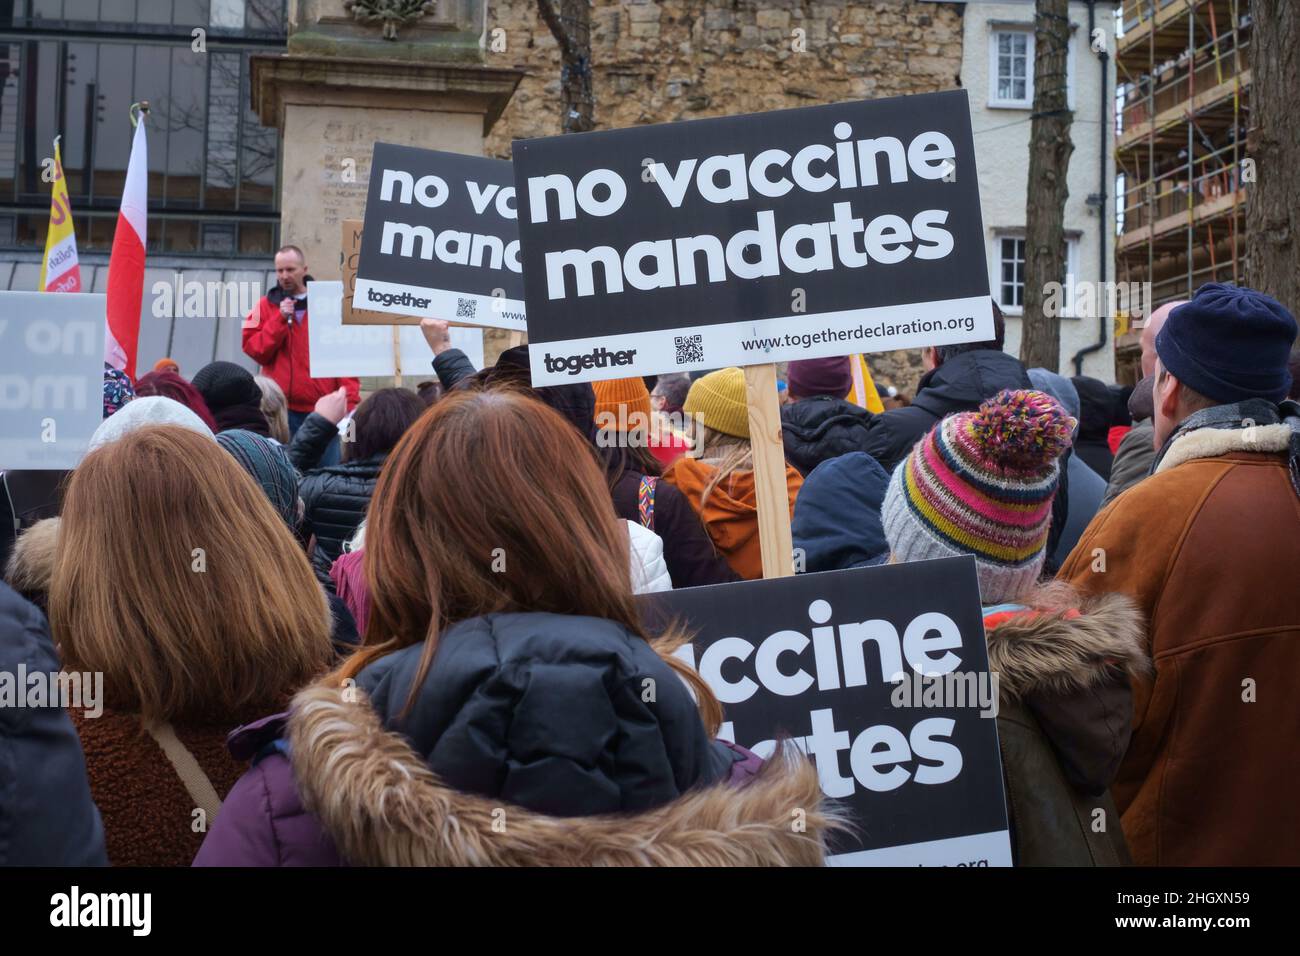 A protest demonstration and march for NHS staff protesting against vaccine mandates or vaccine passports in Oxford, UK Stock Photo